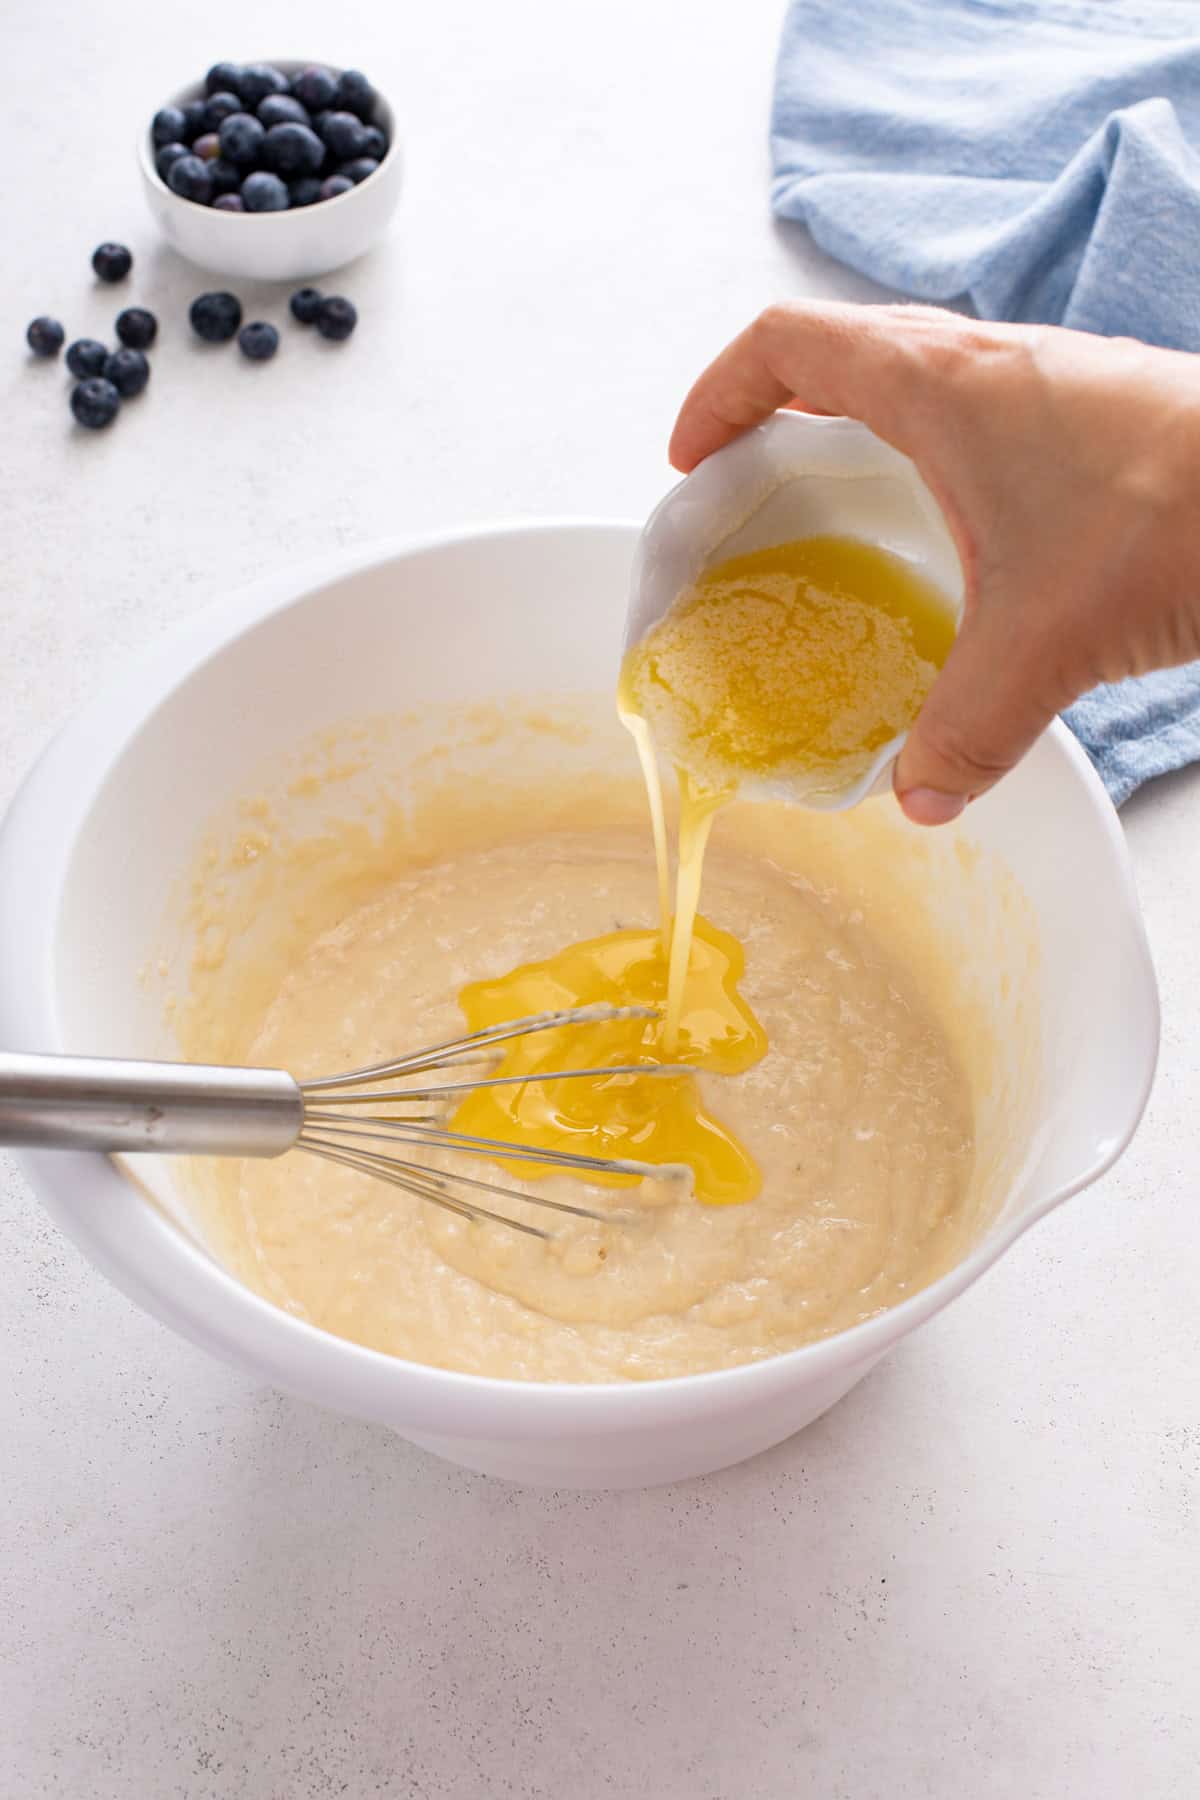 Melted butter being poured into pancake batter in a white bowl.